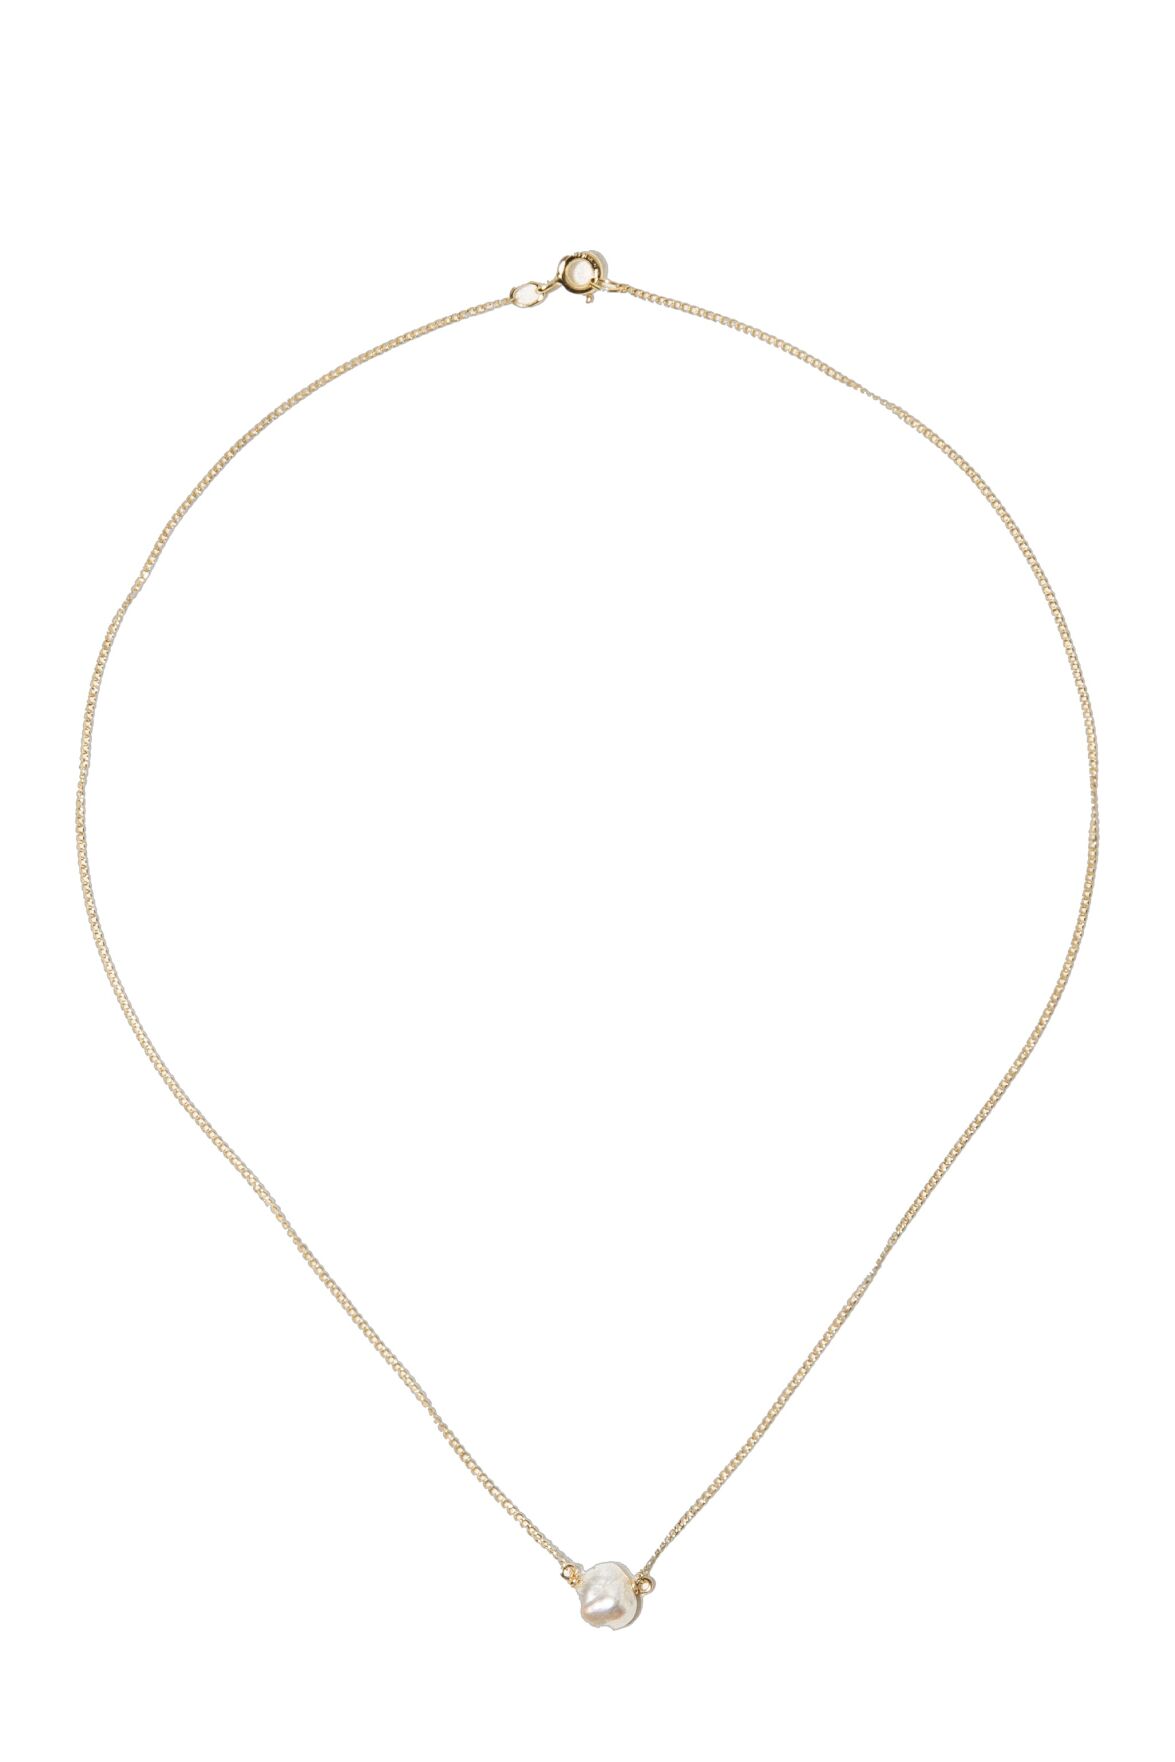 Gift Guide - Pearl Drop Necklace